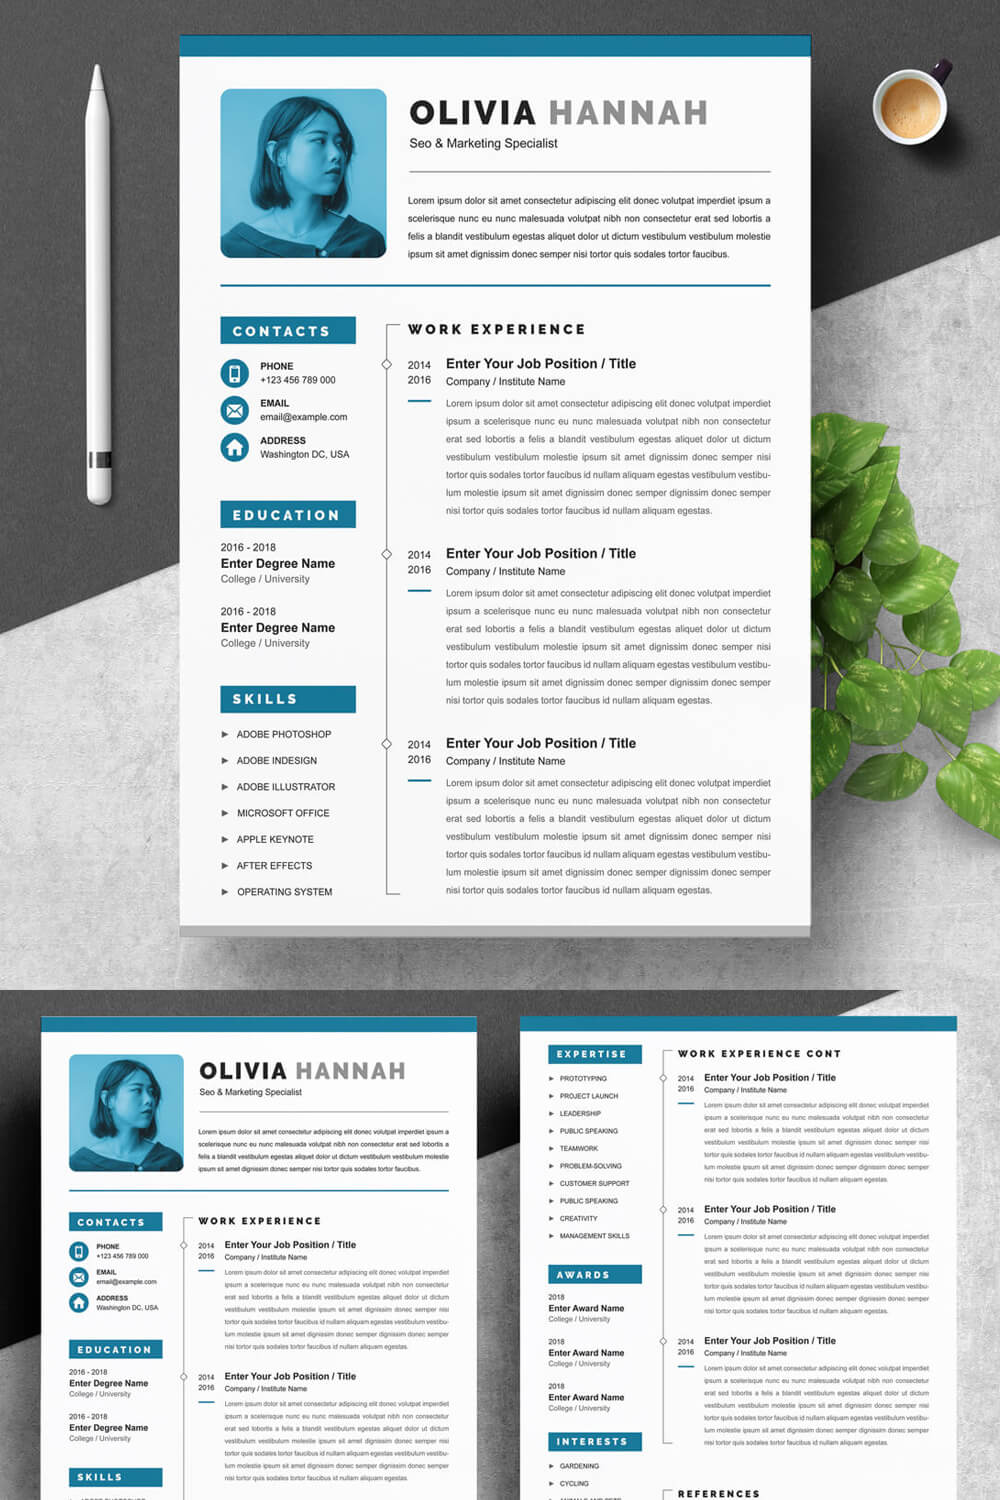 Clean and professional resume template with blue accents.